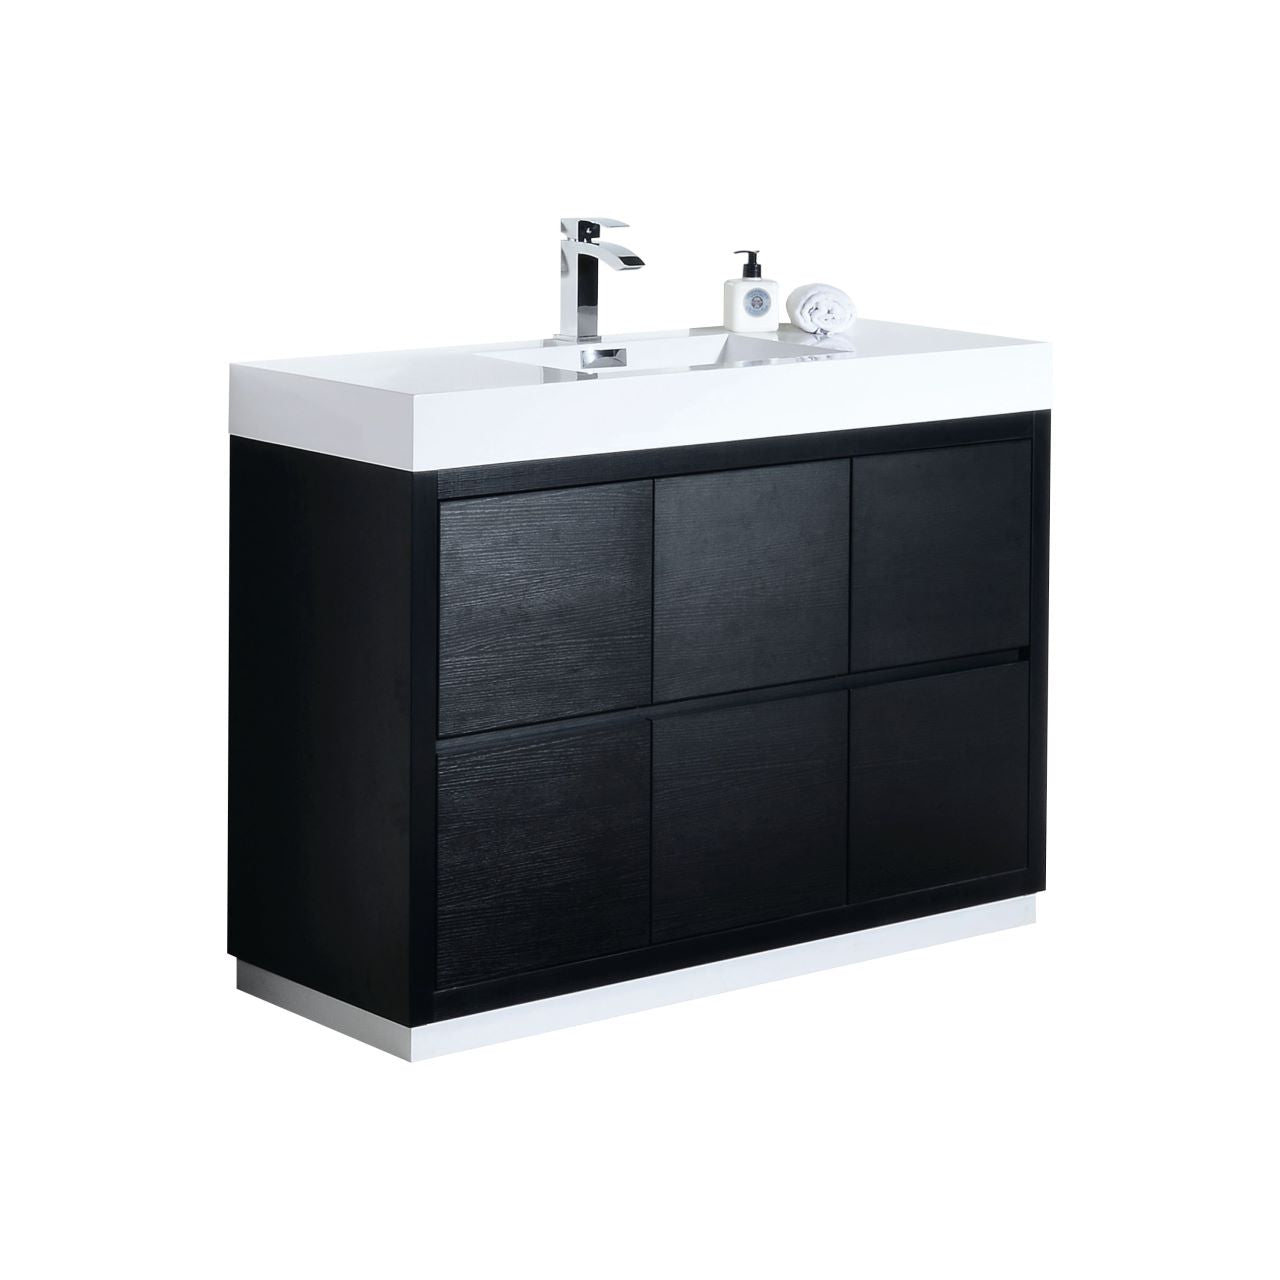 KUBEBATH Bliss FMB48-BK 48" Single Bathroom Vanity in Black with White Acrylic Composite, Integrated Sink, Angled View